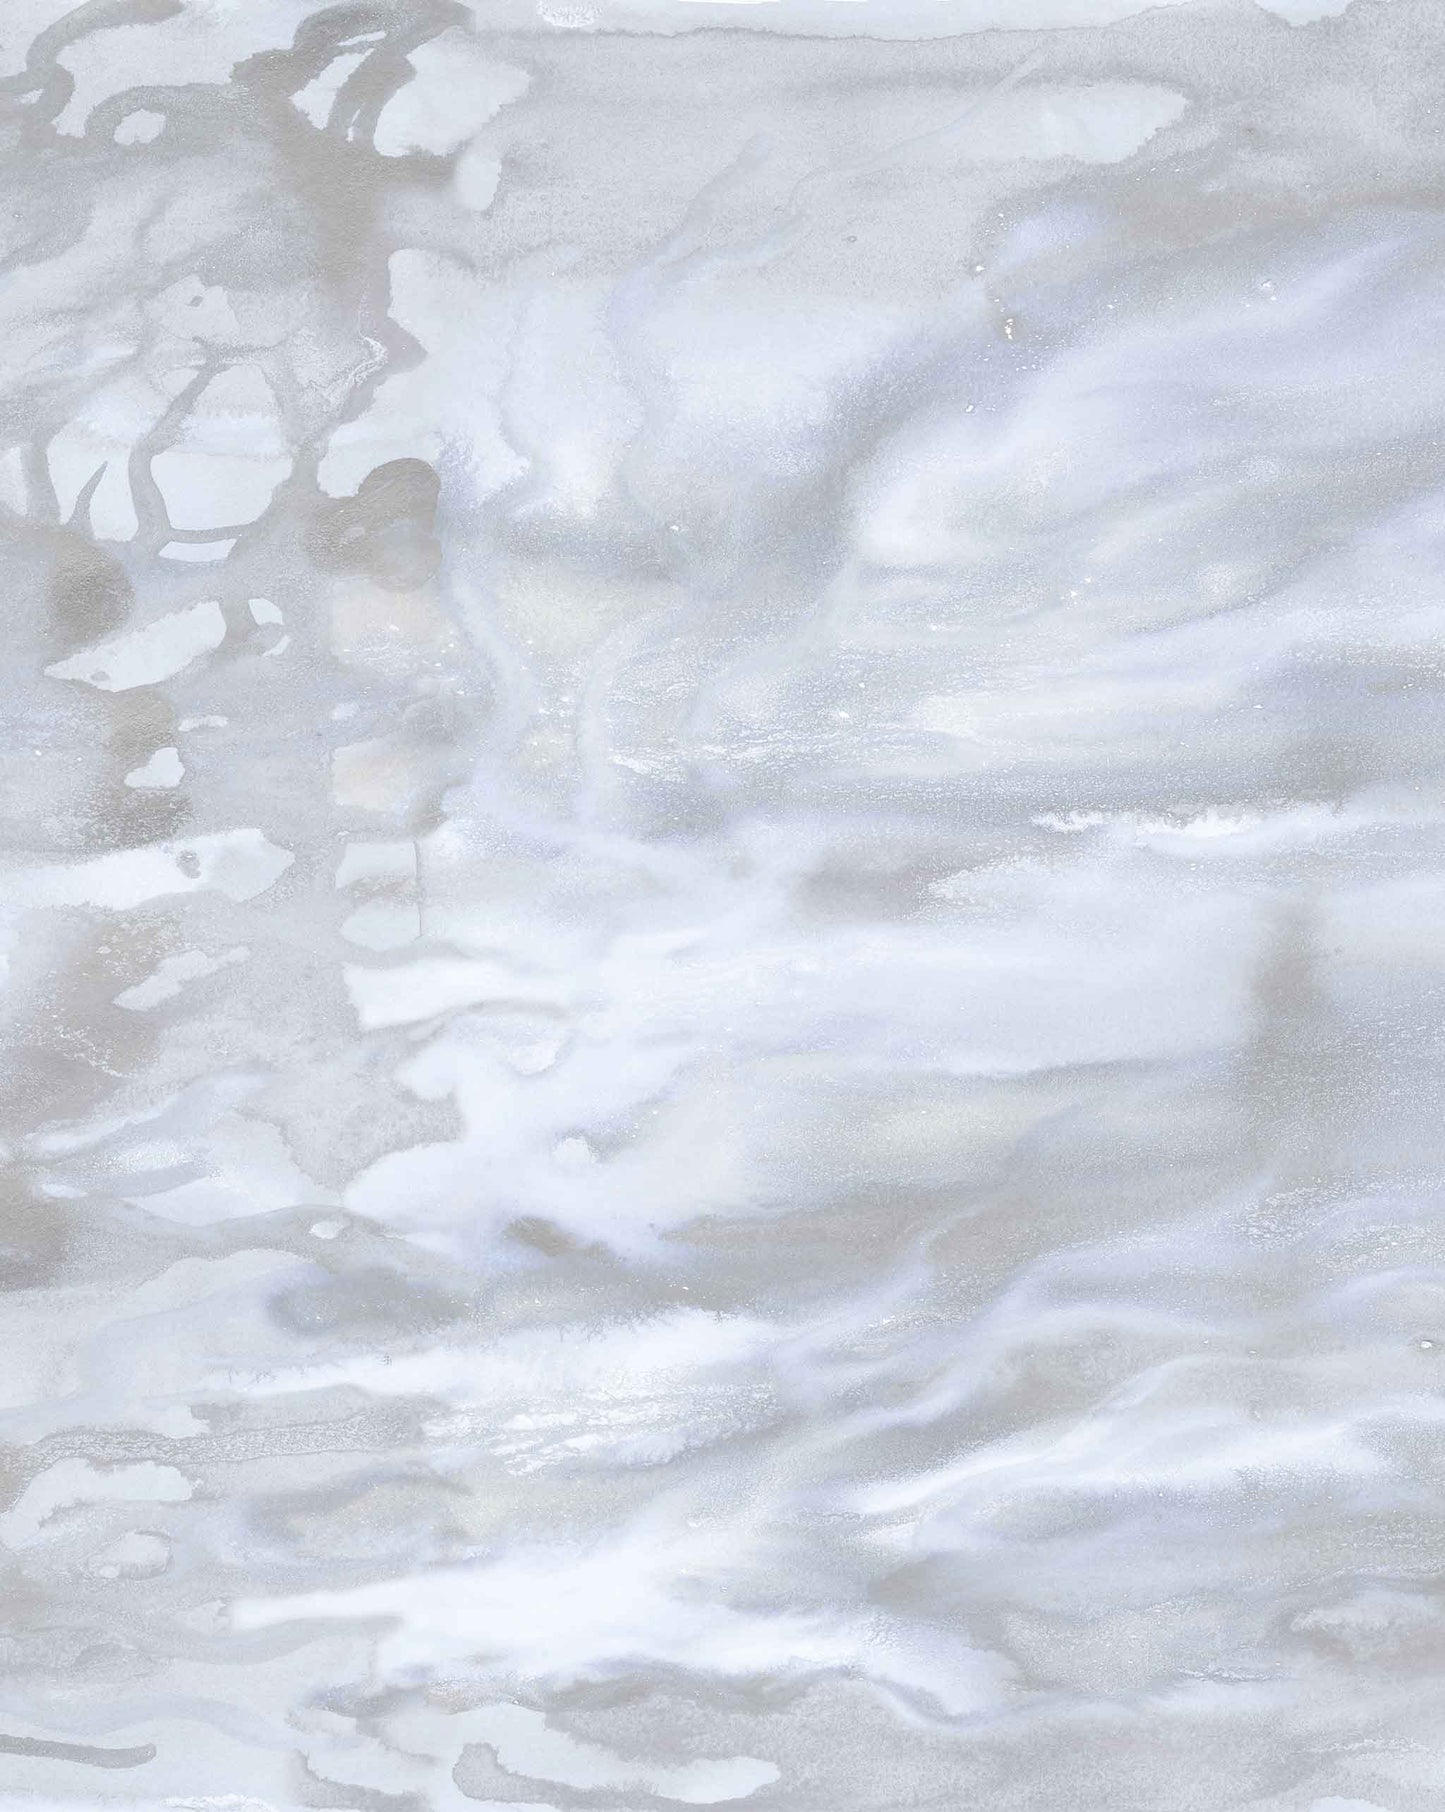 Abstract gray and white marbled texture resembling natural stone in a dreamy colorway of Delta Wallpaper Mural||Ocean.